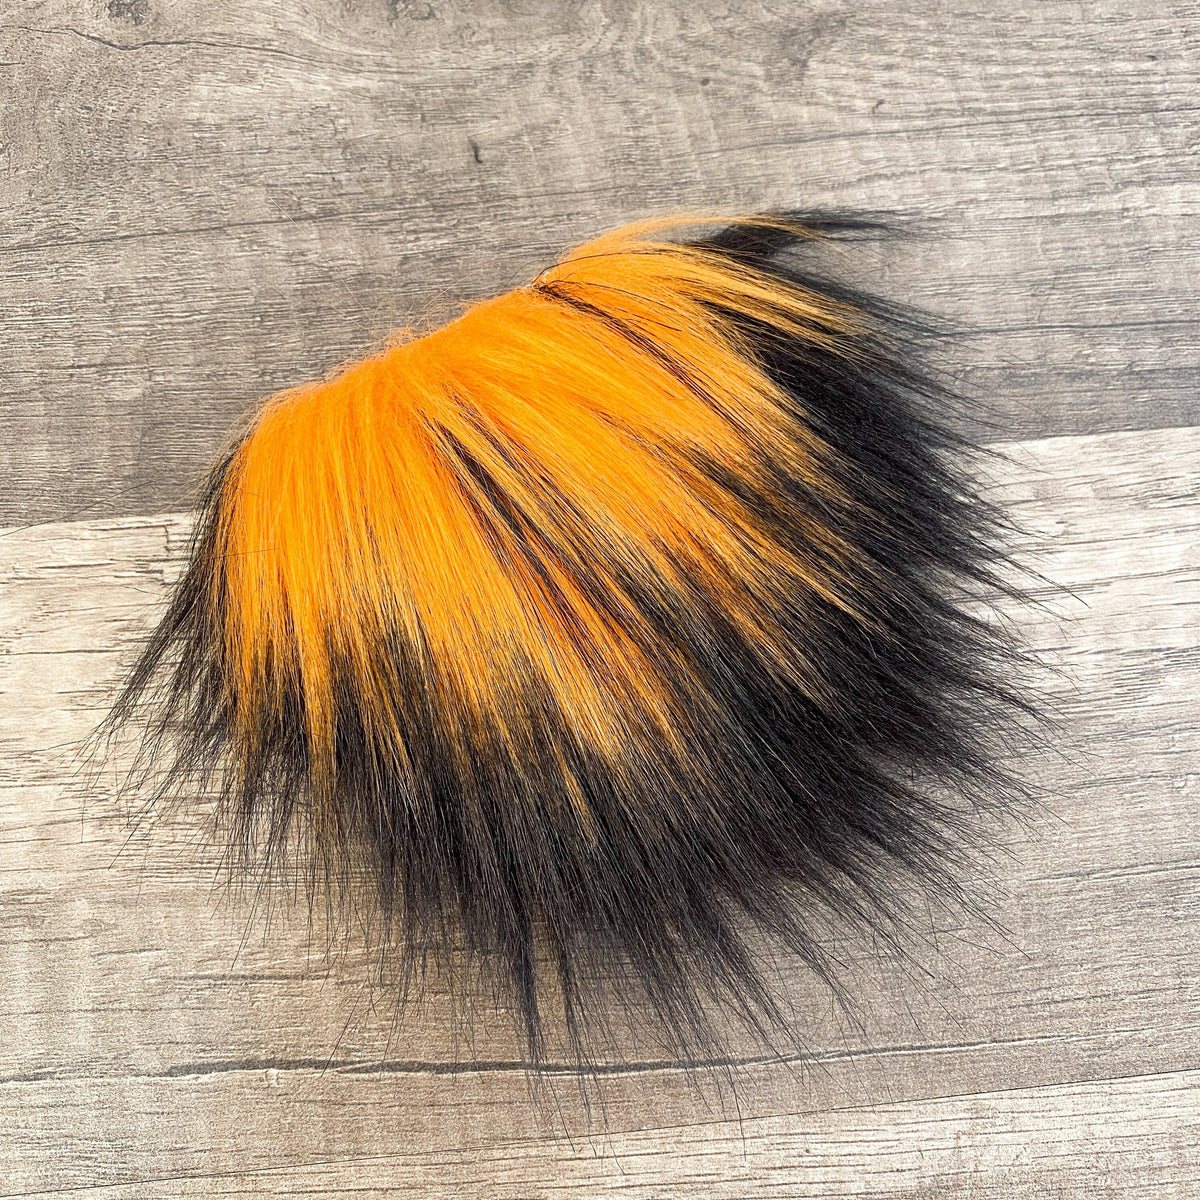 Two Piece Layered Gnome Beard - Black-Tipped Orange Over Straight Black